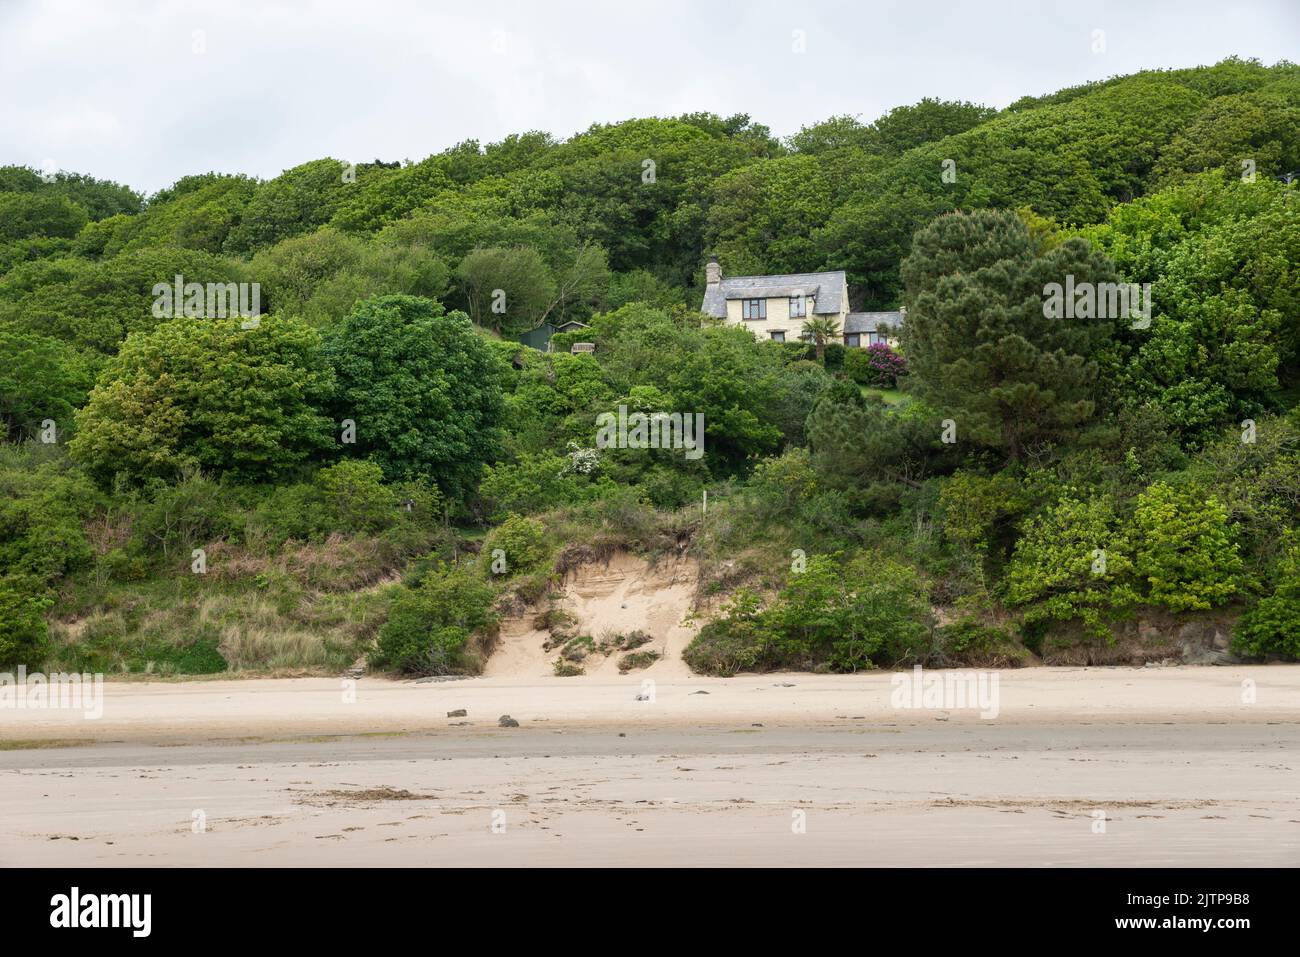 Houses with sea views at Borth-y-Gest near Porthmadog on the coast of North Wales. Stock Photo